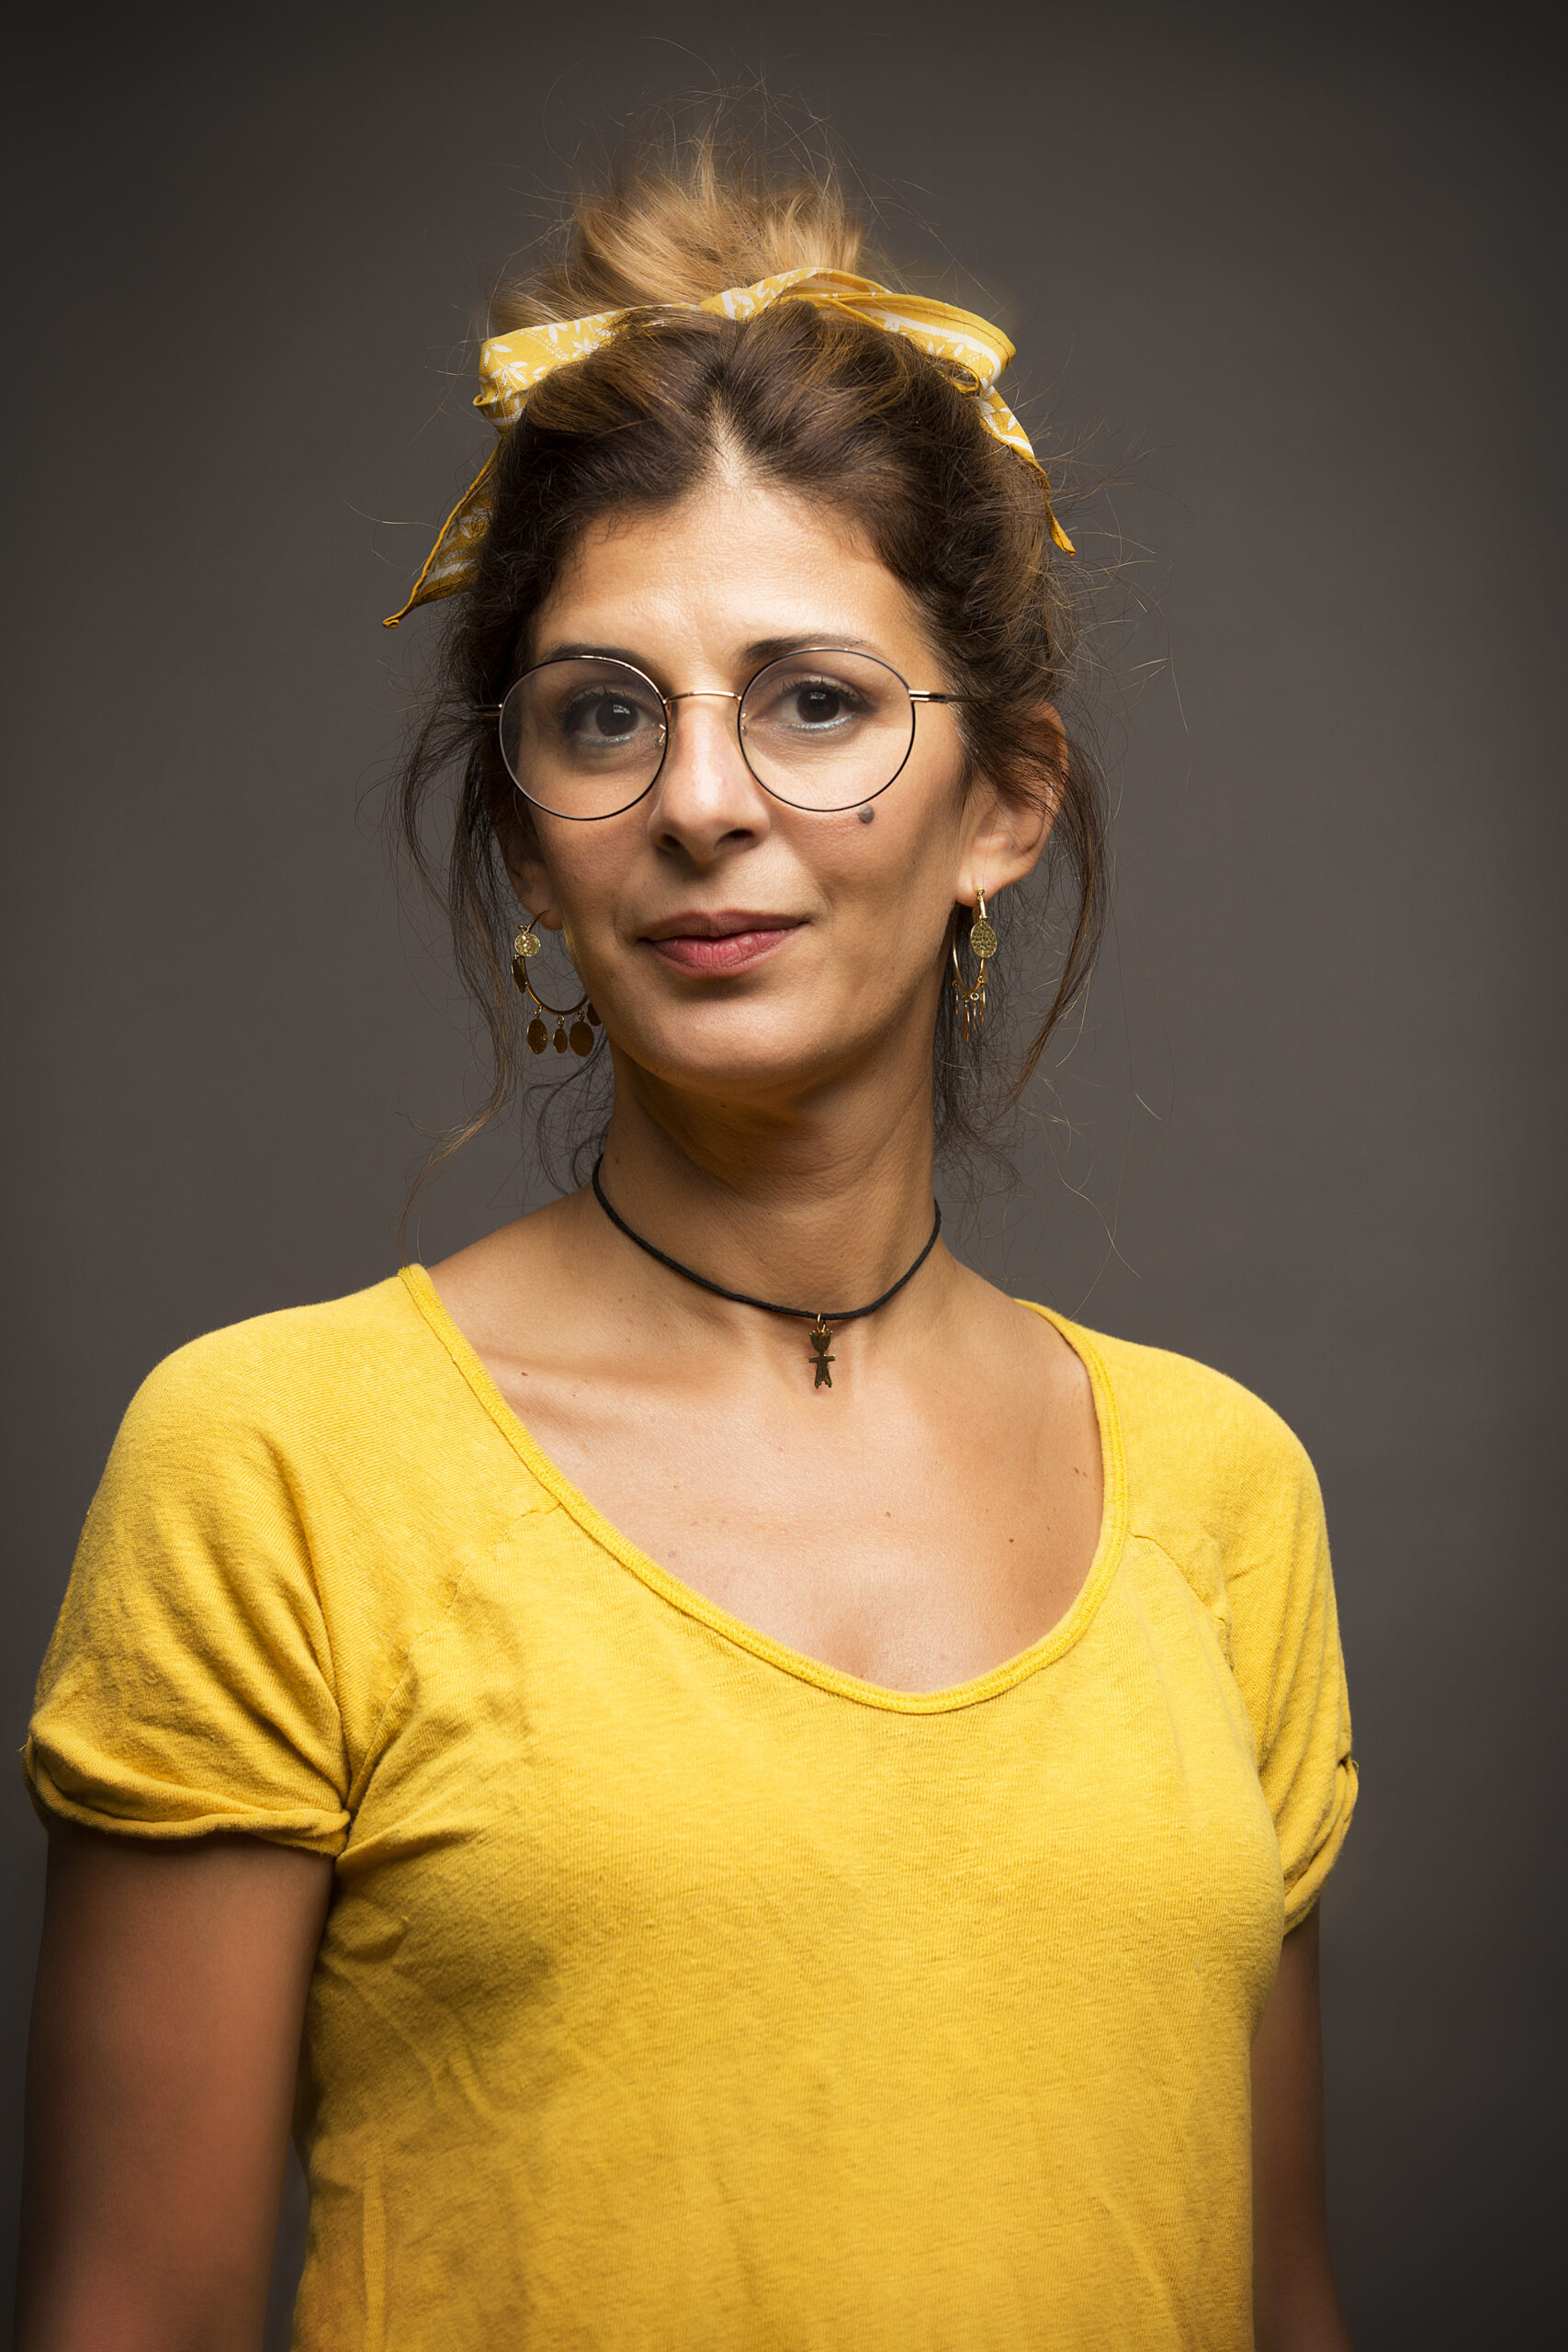 woman with hair loosly tied up wearing glasses